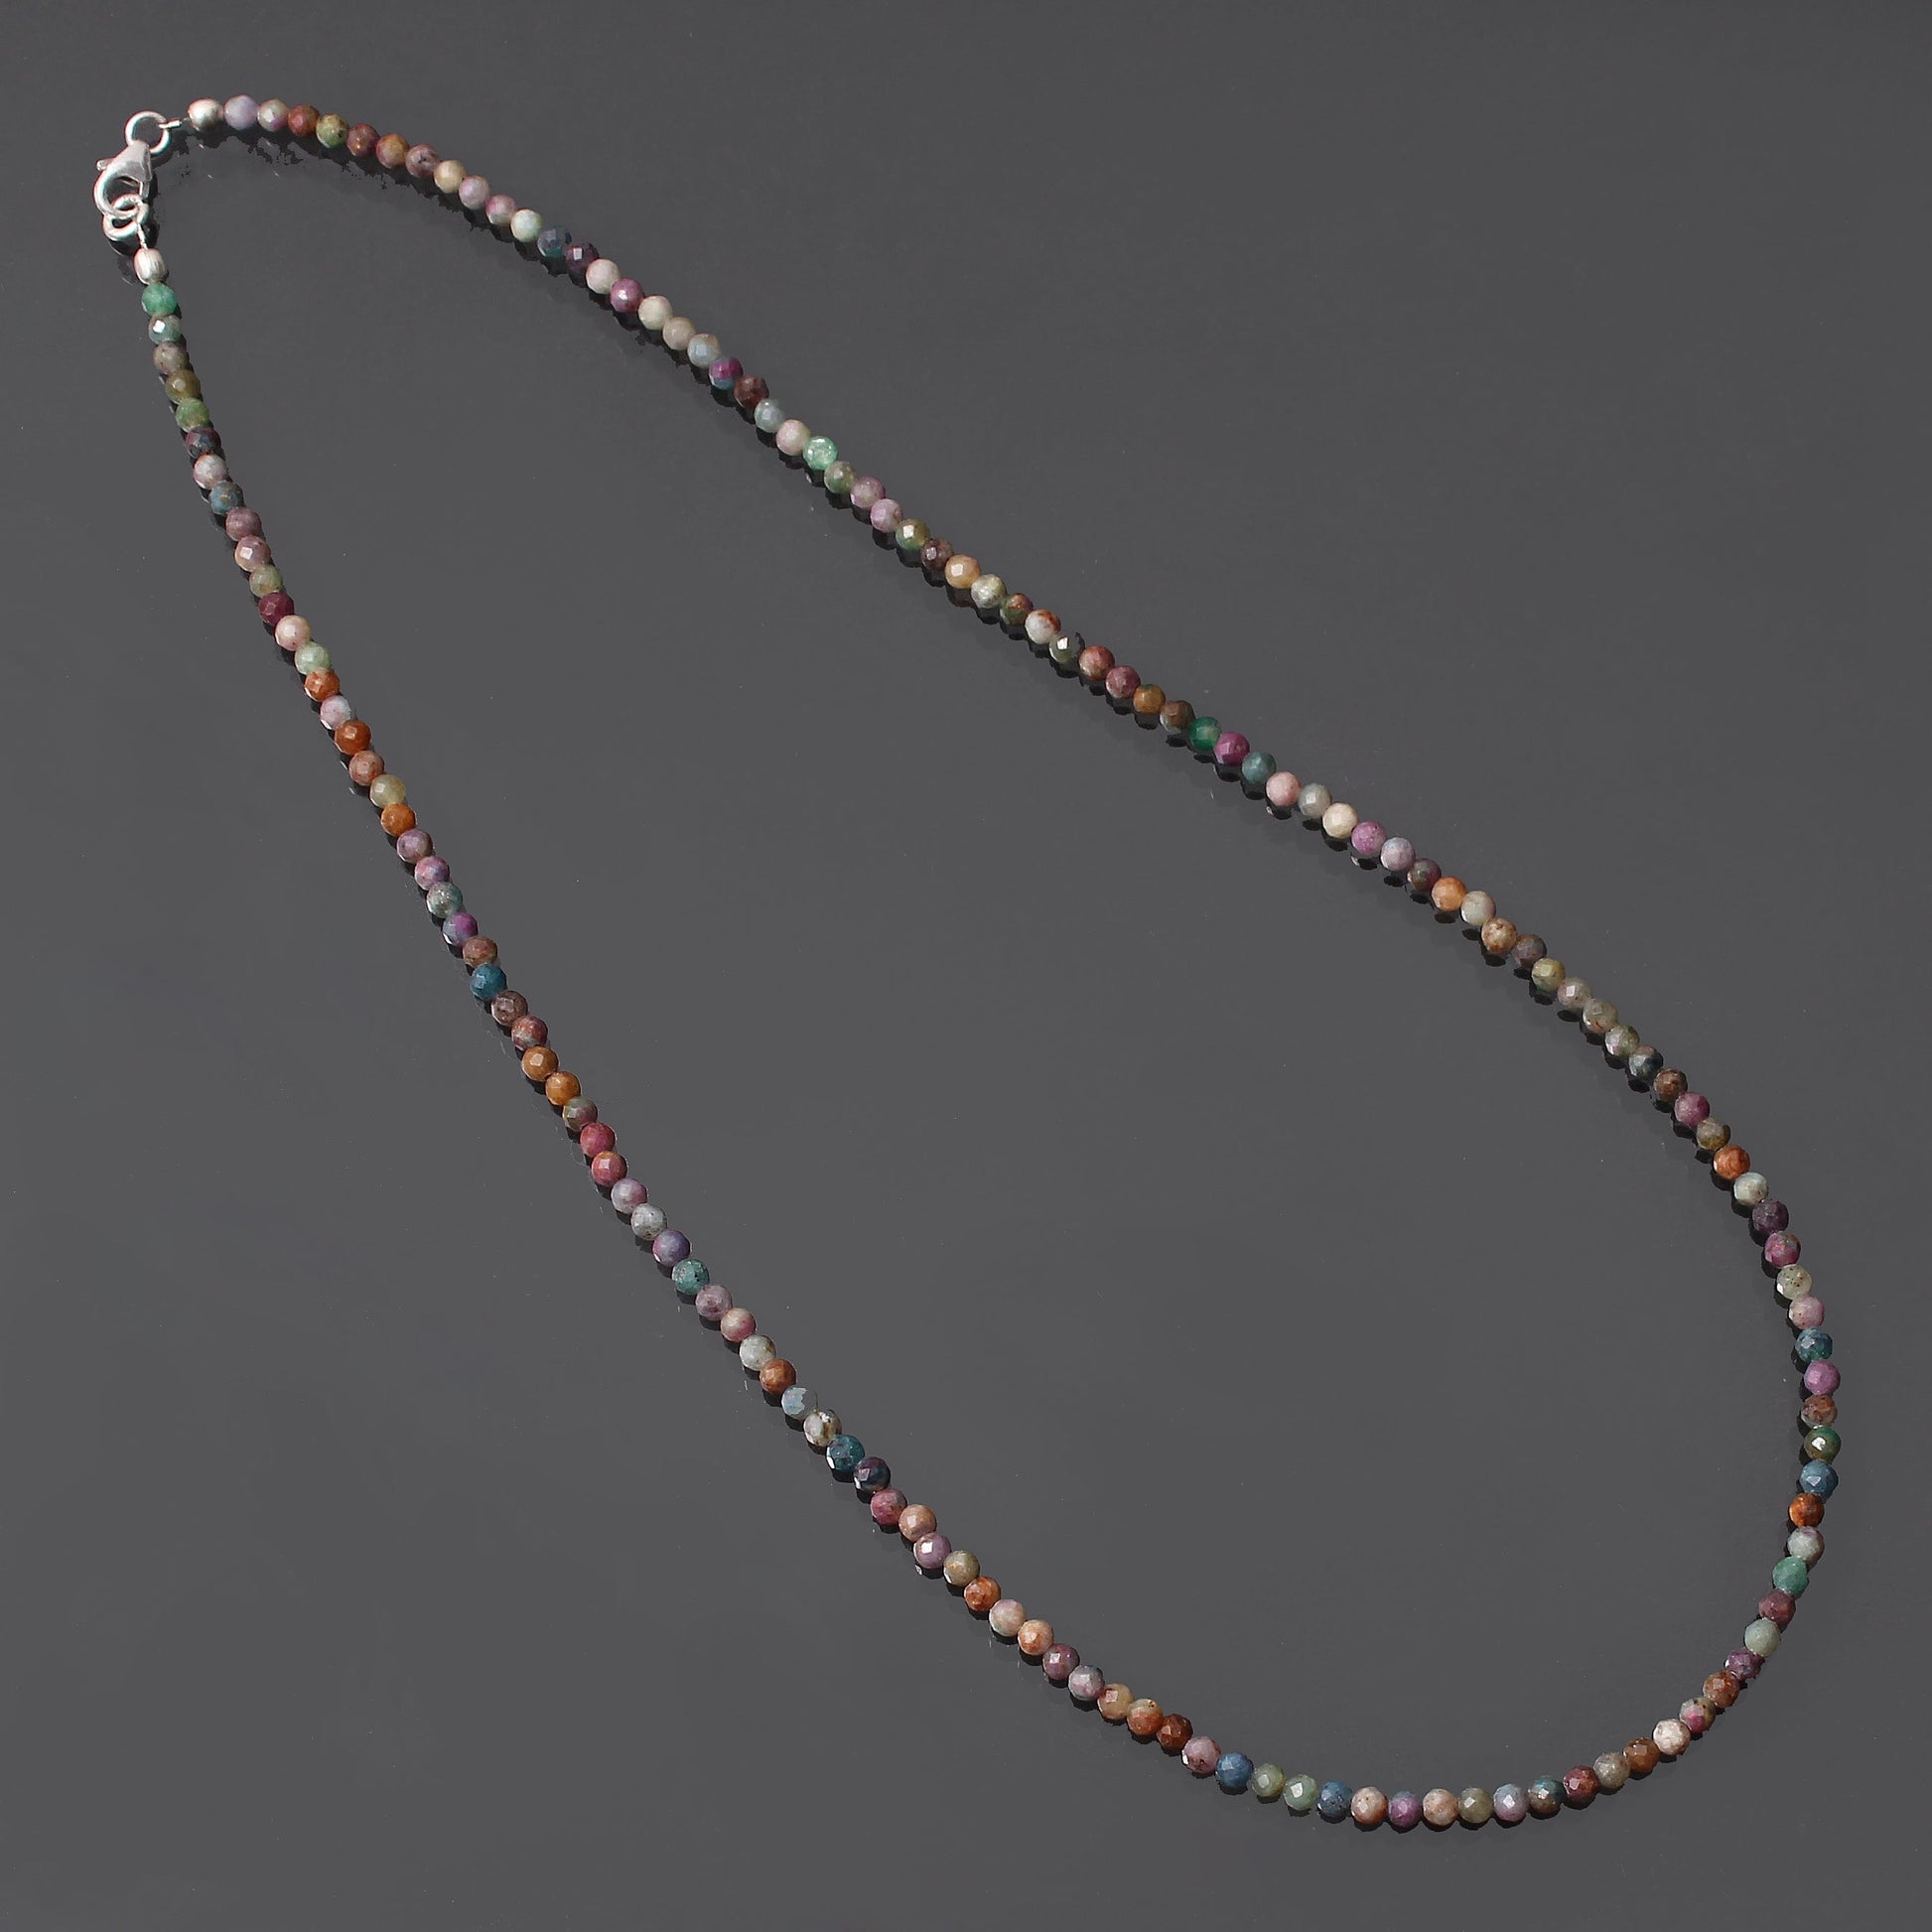 Natural Multi Tourmaline Beaded Necklace, Micro Faceted Round Necklace Gift For Women. GemsRush